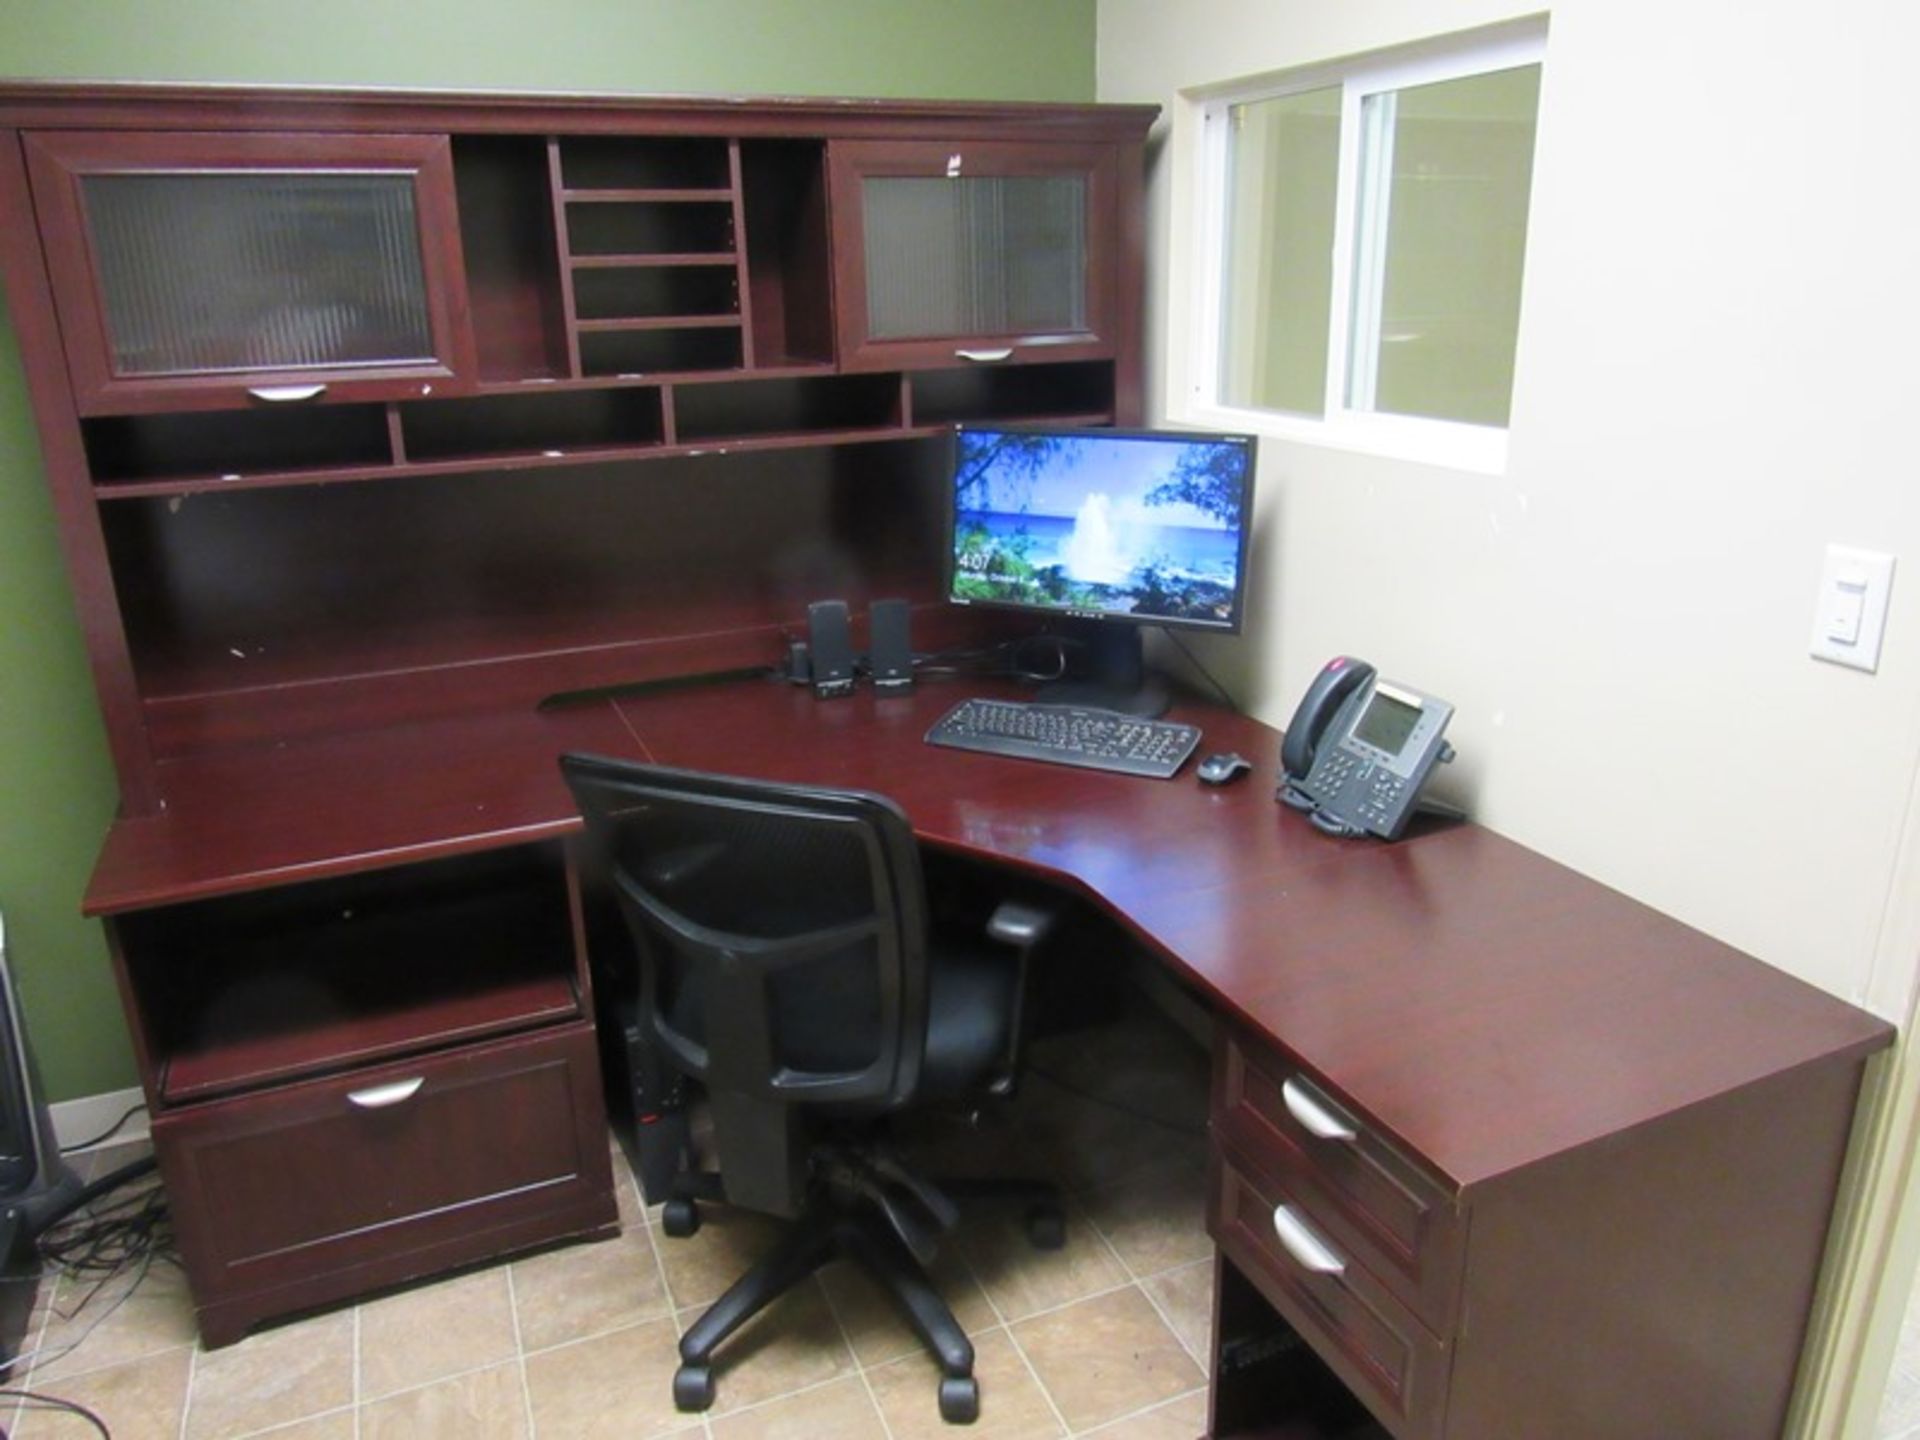 Lot Office: Desk, Chair, Heater, Plastic Table, 4' long (No Electronics or Tagged Items Included) (